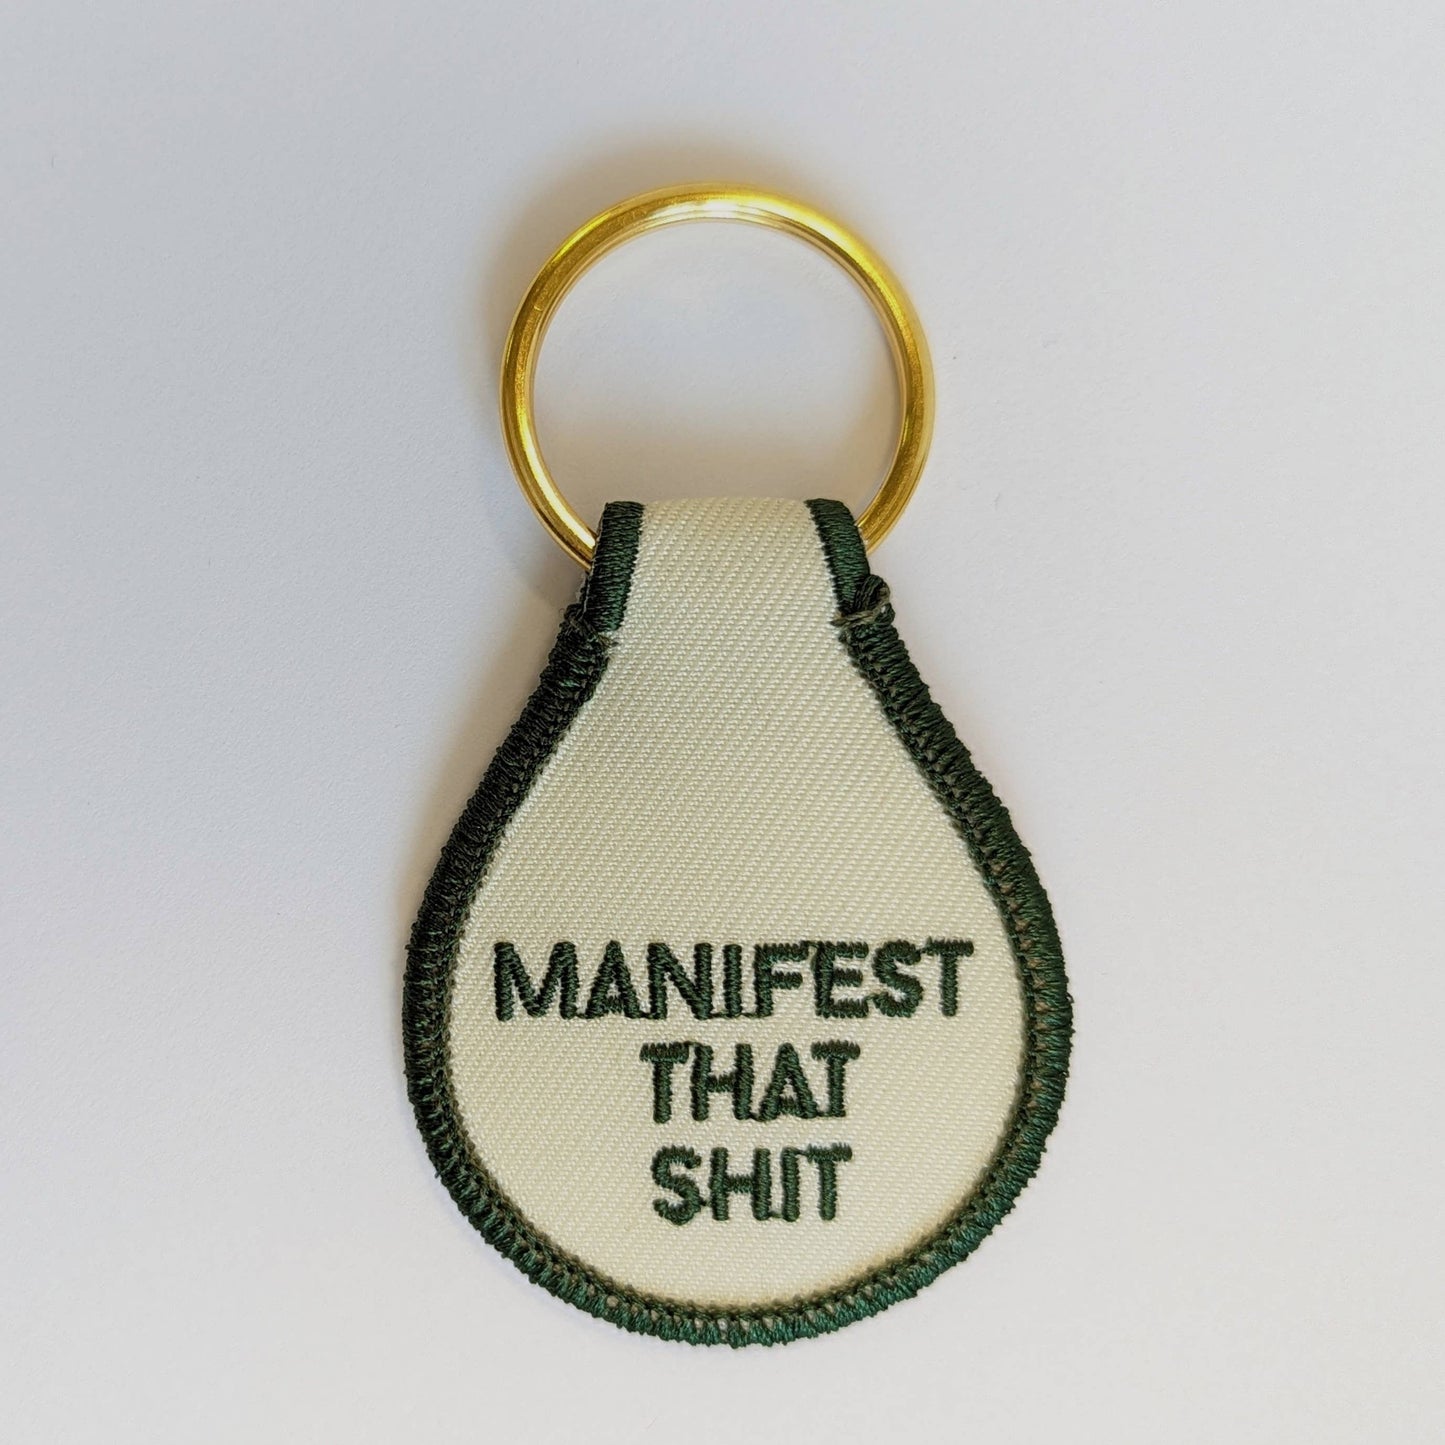 Manifest That Shit Embroidered Key Tag